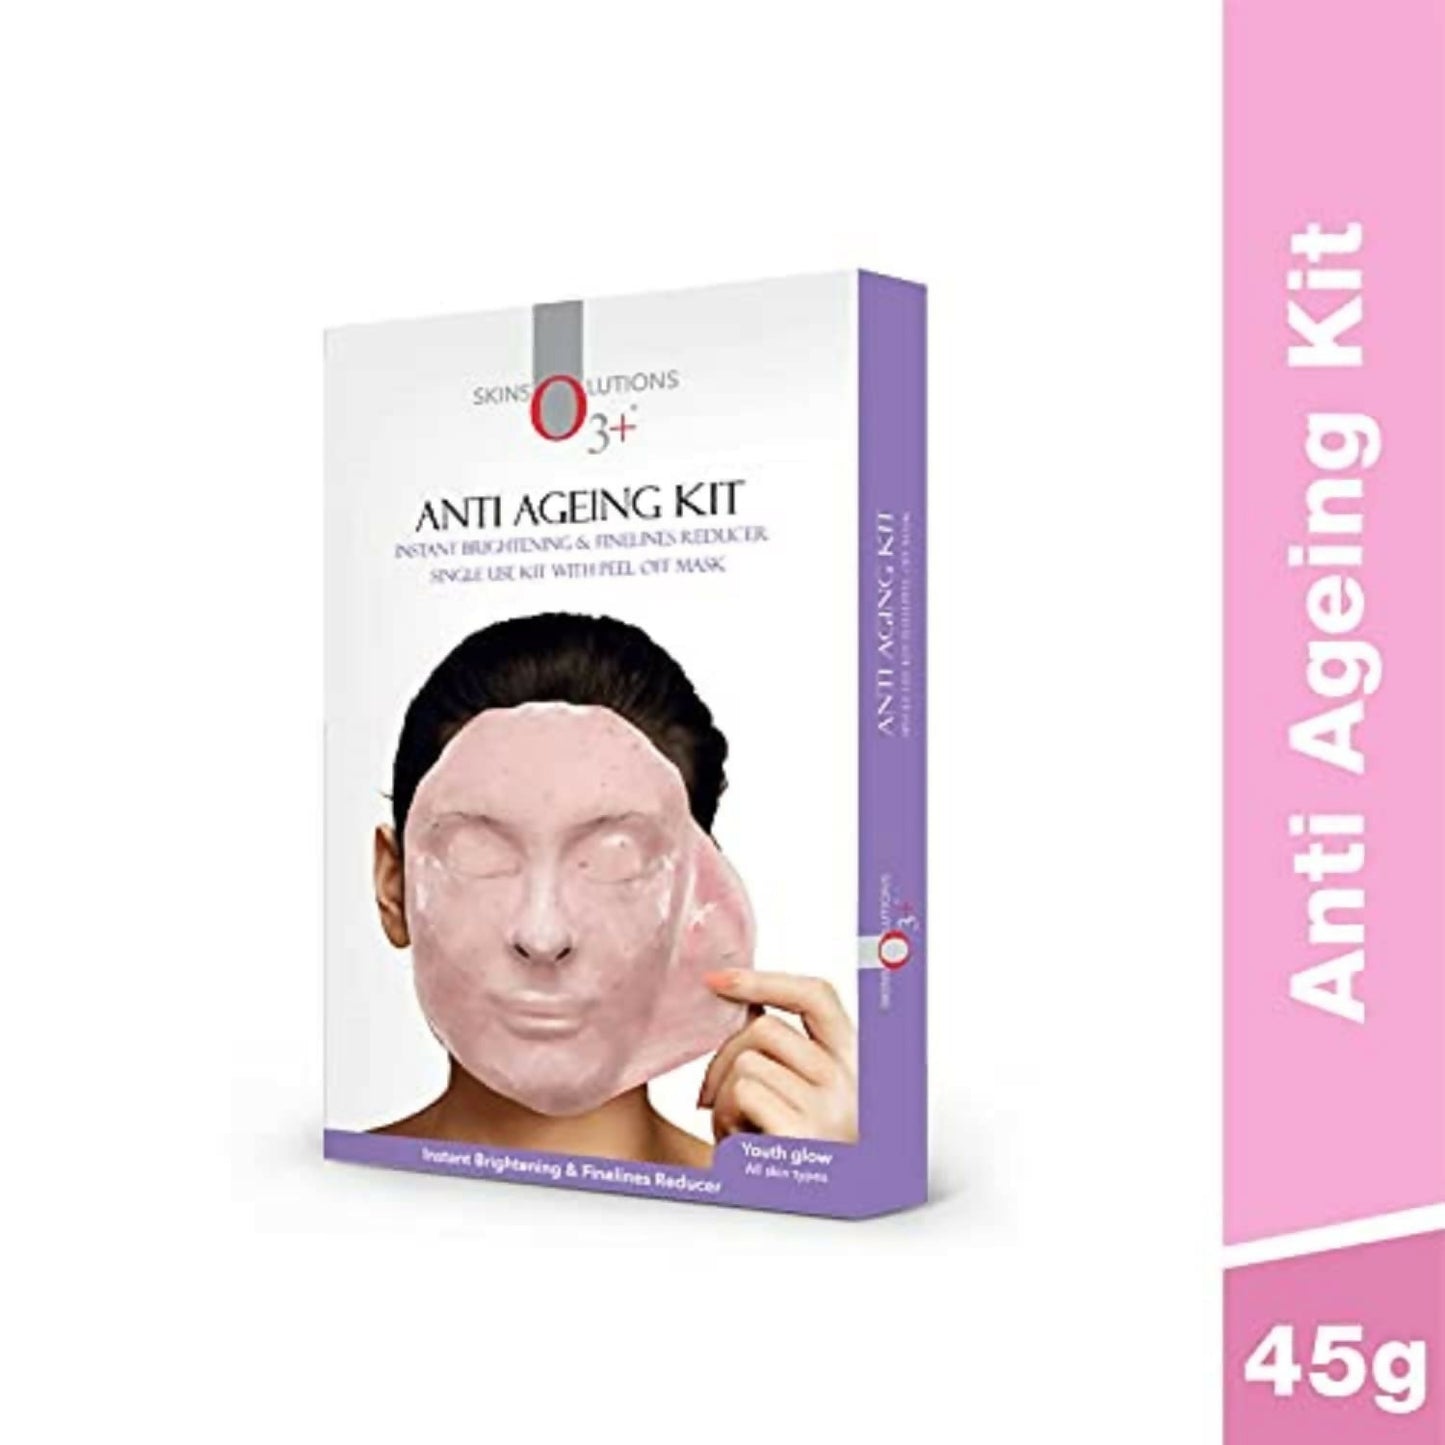 Professional O3+ Anti Ageing Facial Kit Brightening & Finelines Reducer